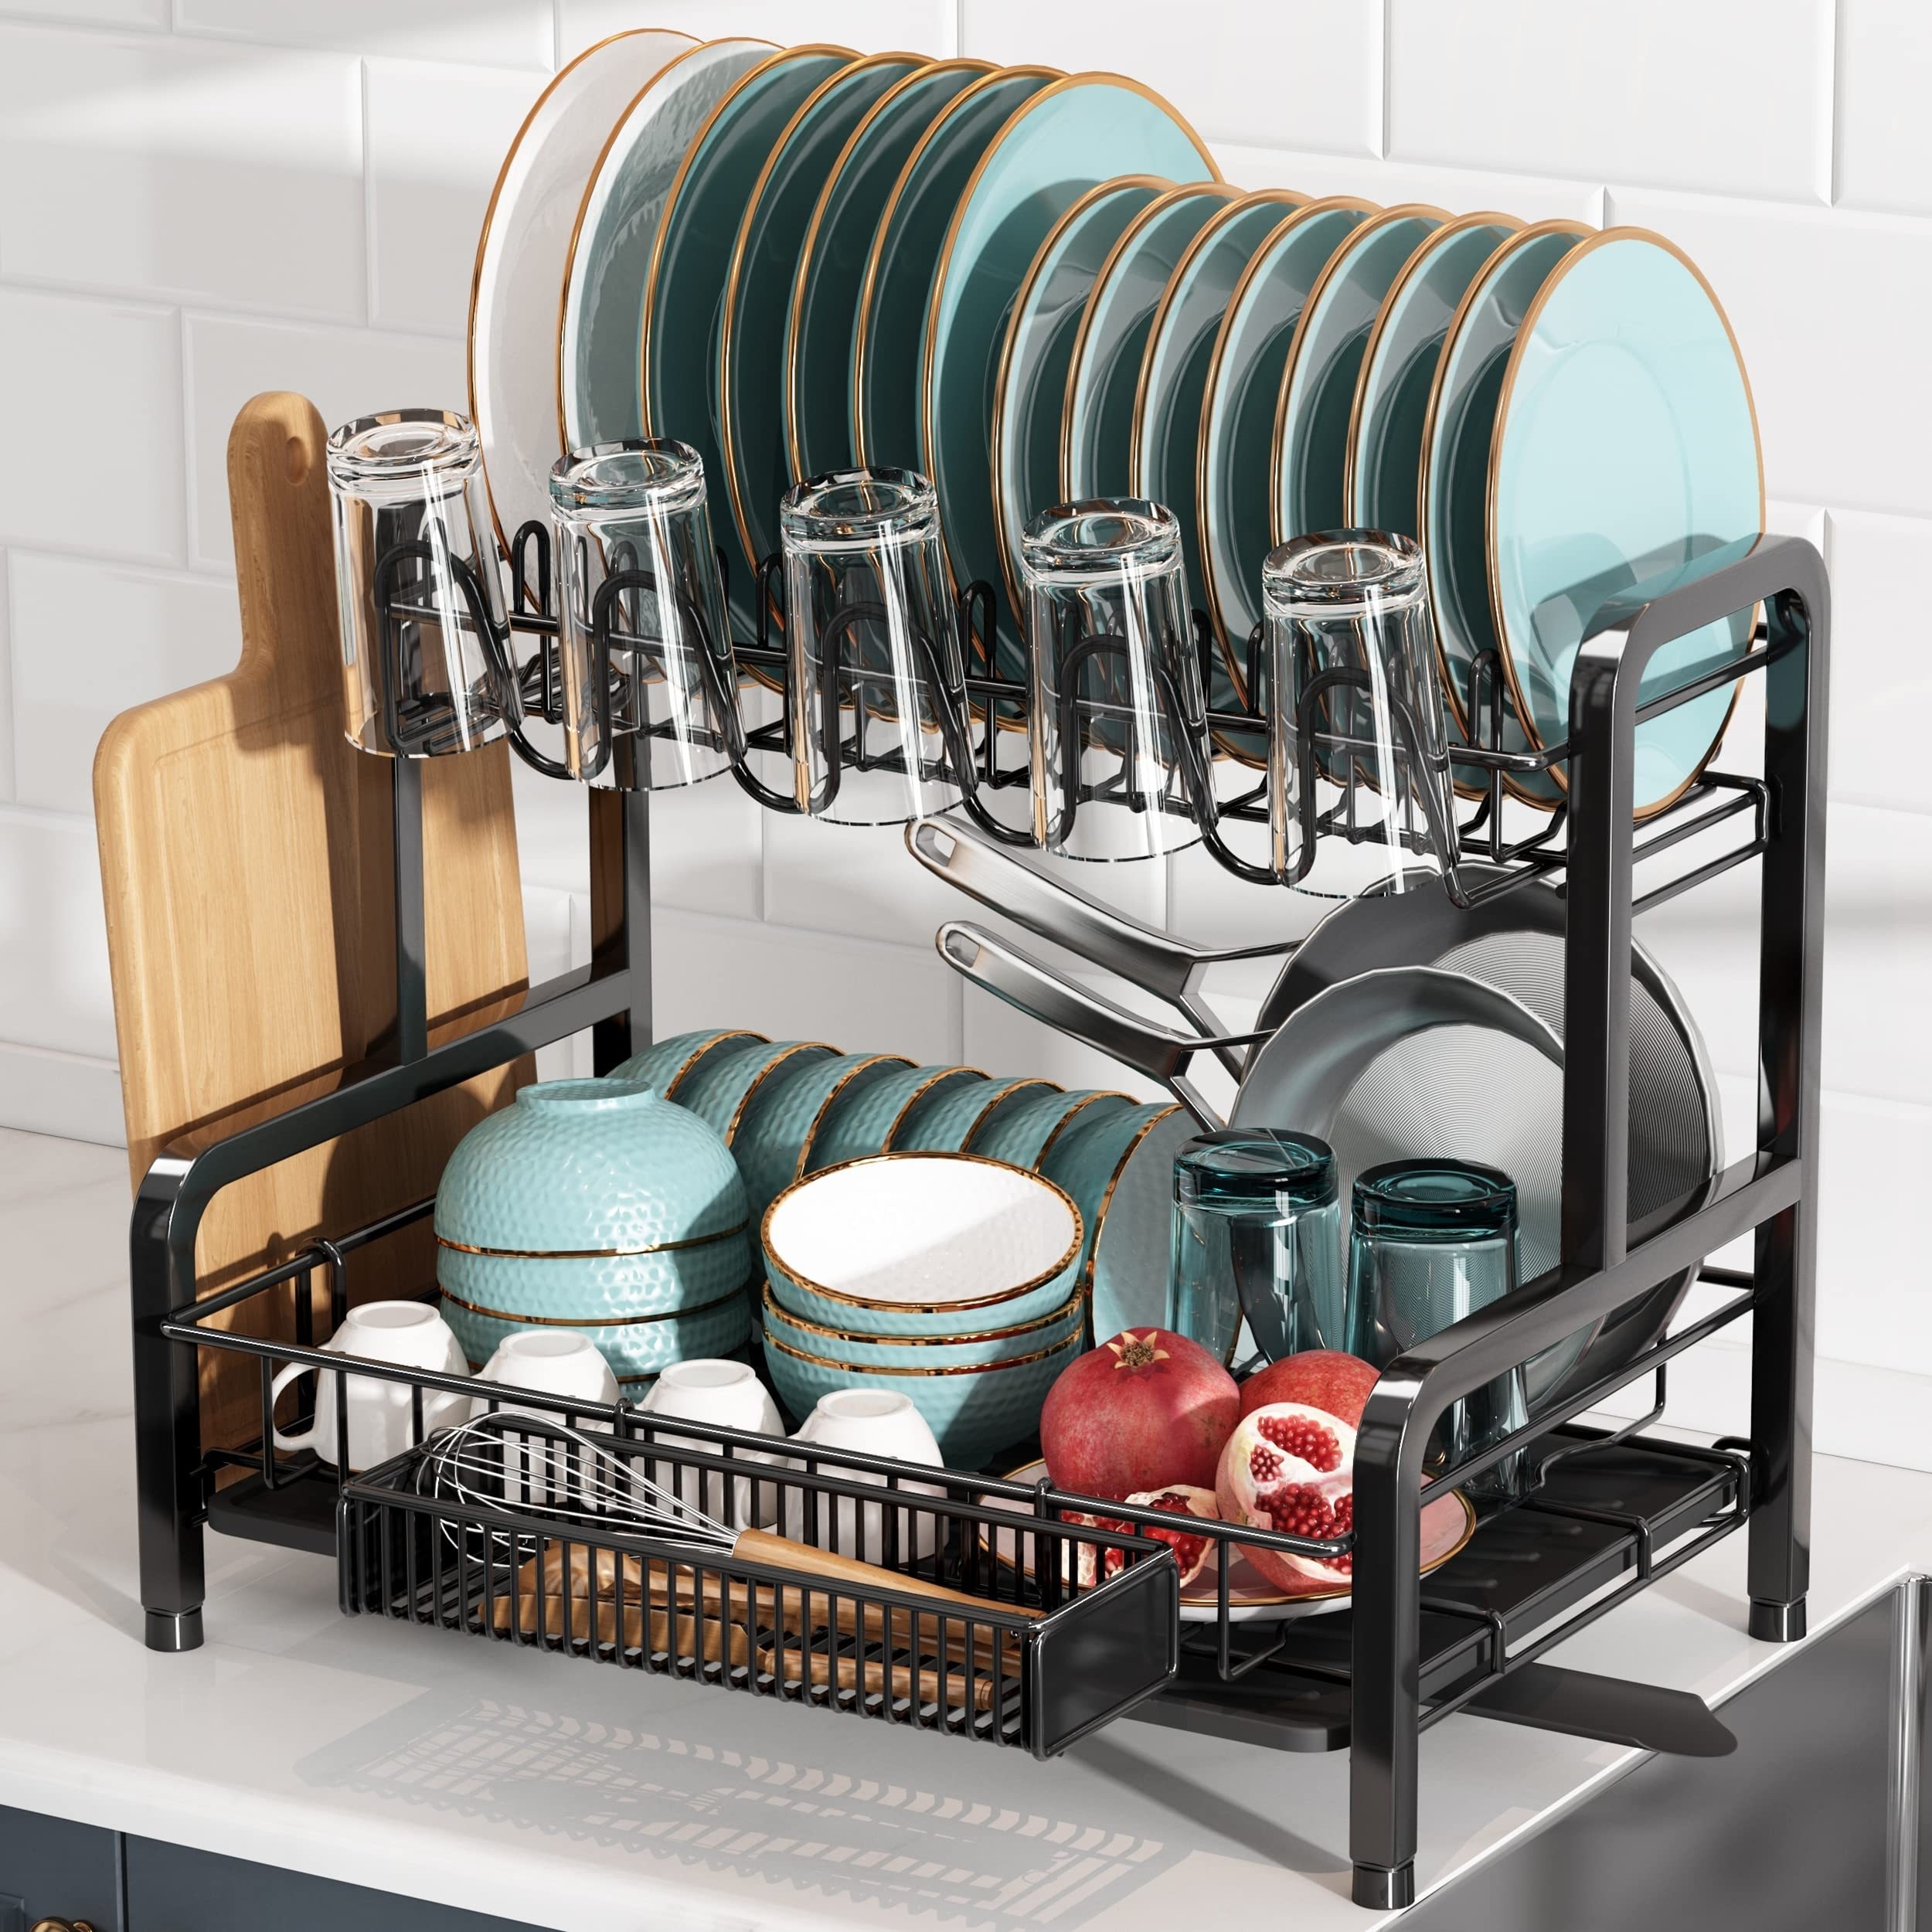 romision Dish Drying Rack and Drainboard Set, 2 Tier Large Stainless Steel  Sink Organizer Dish Racks